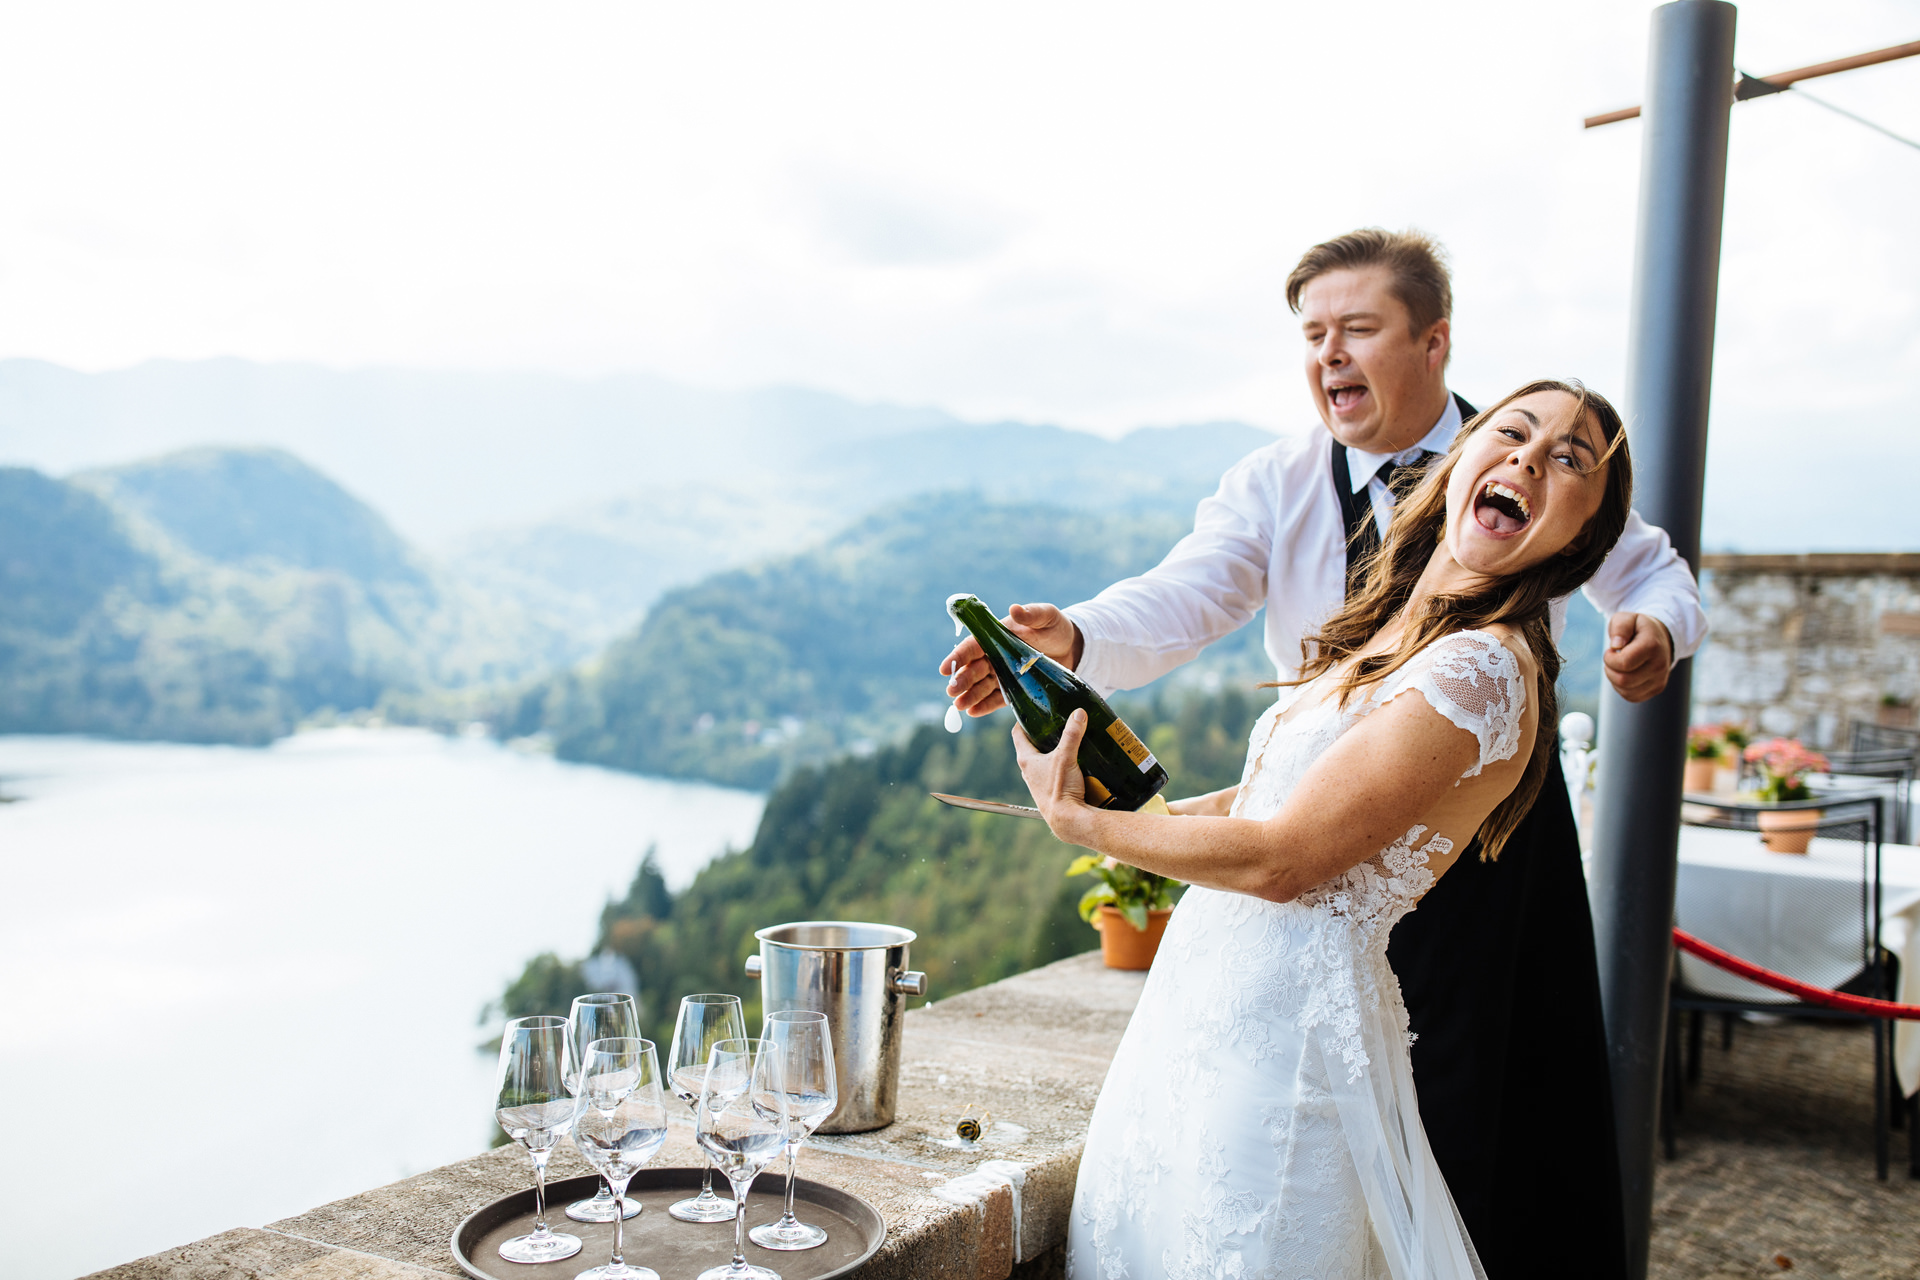 bride slicing open bottle of champagne with knife